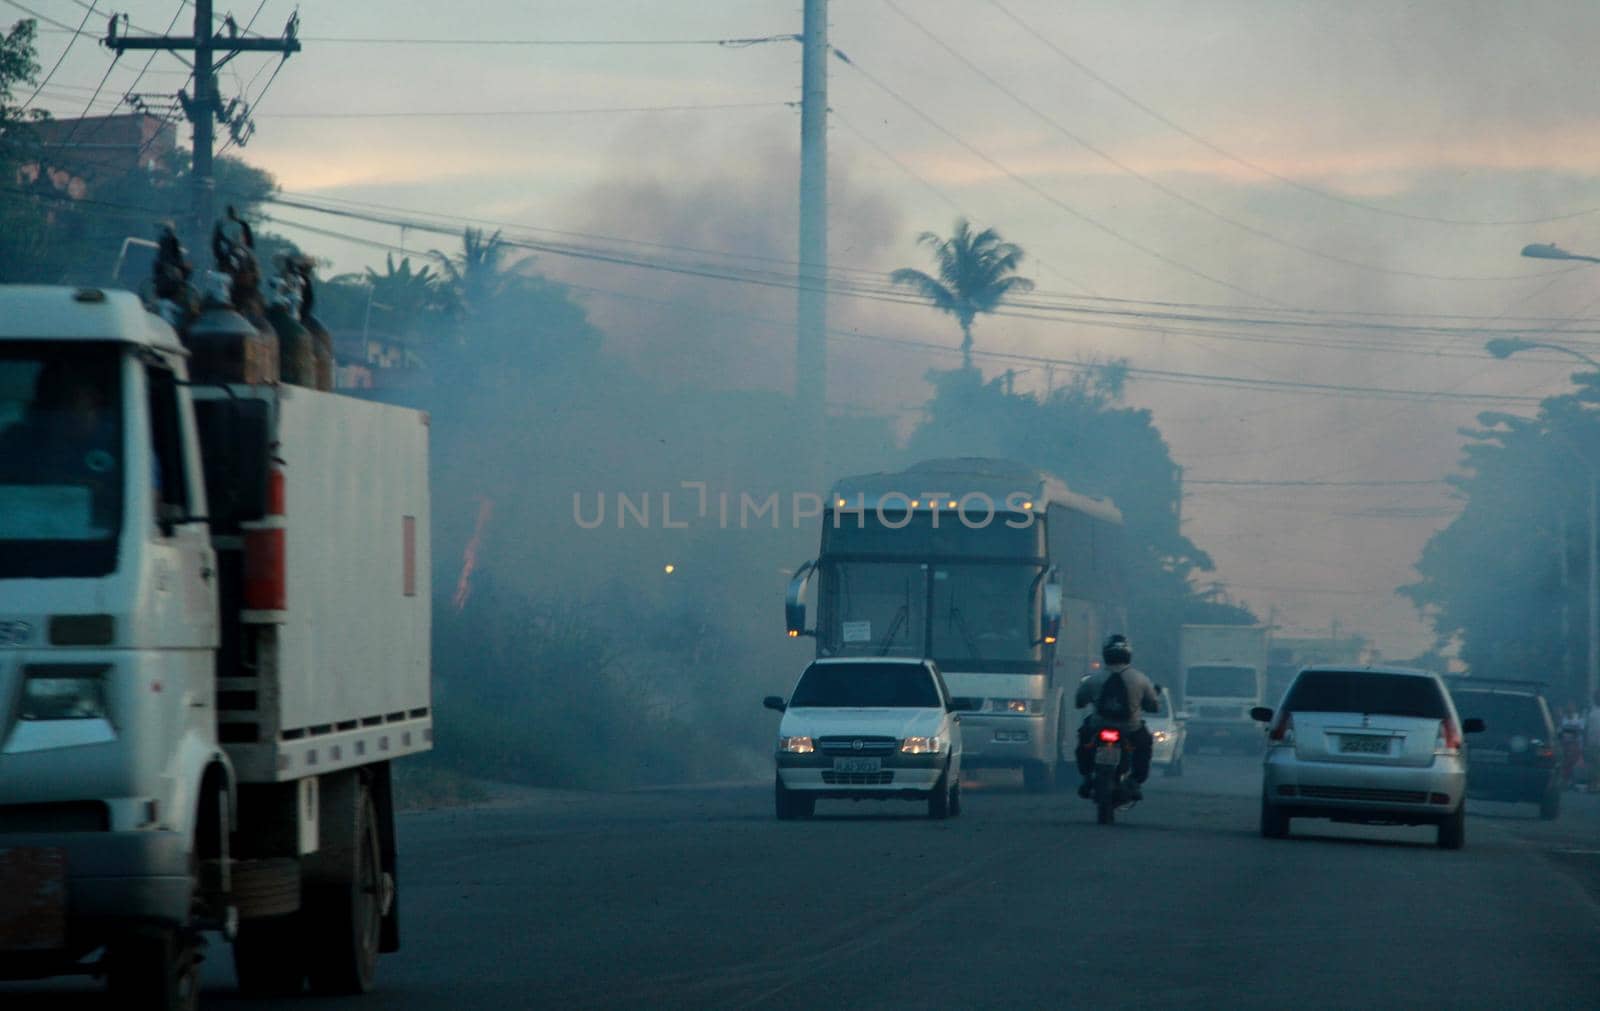 salvador, bahia / brazil - november 29, 2012: vehicles are seen roaming near the smoke from burning vegetation on the BA 528 highway, Fazenda Coutos region in the city of Salvador.